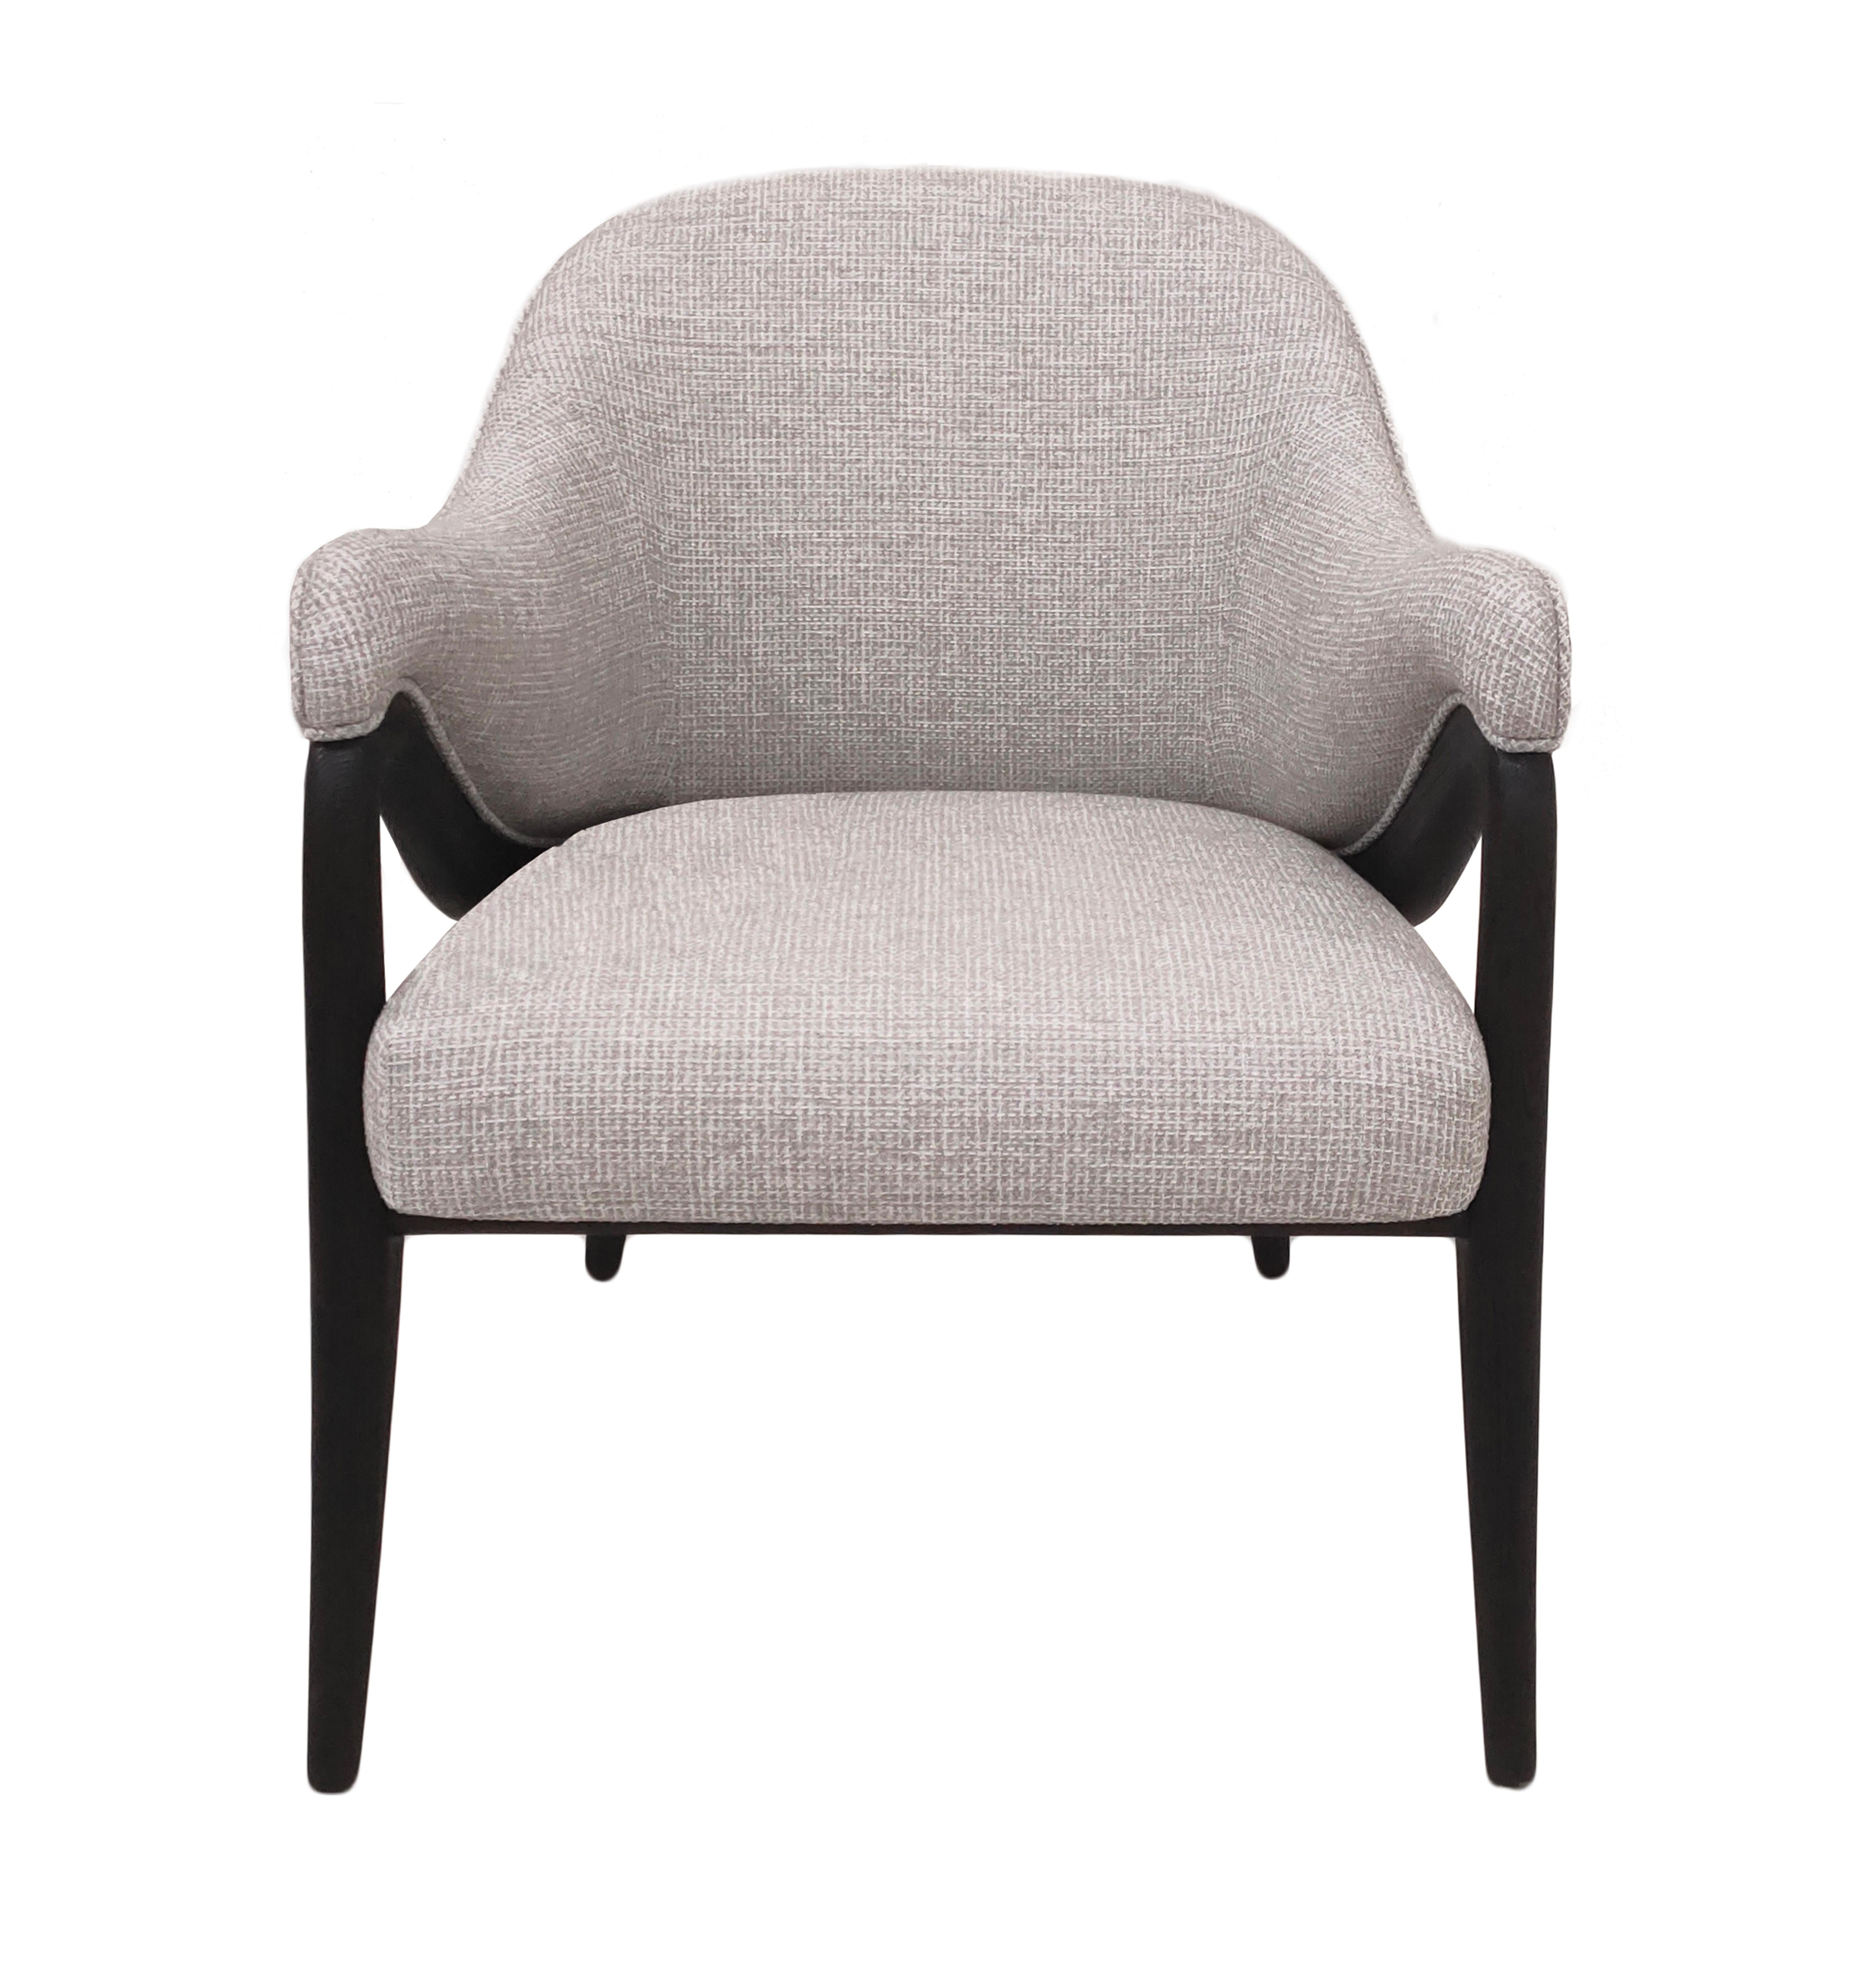 Description: Armchair in pinewood with Loro Piana fabric
Color: Charcoal and light grey
Size: 60 x 73 x 80 H cm
Material: Pinewood and Loro Piana fabric
Collection: Art Déco Garden.